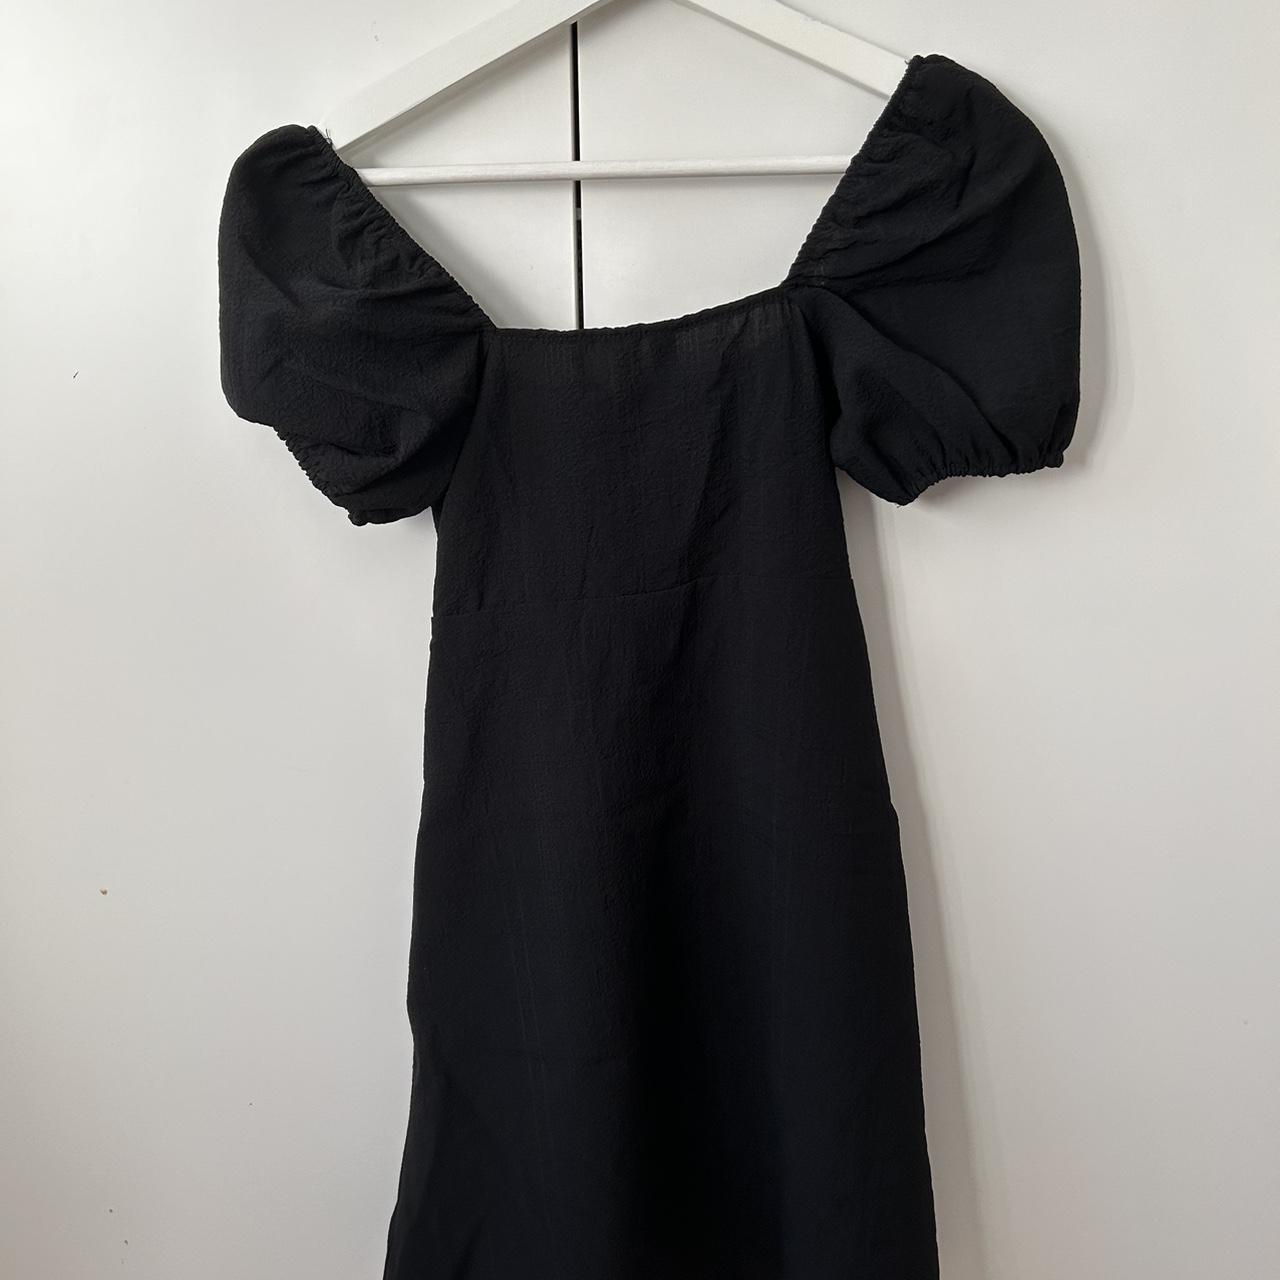 H&M divided black dress 🎵 in great condition, never... - Depop